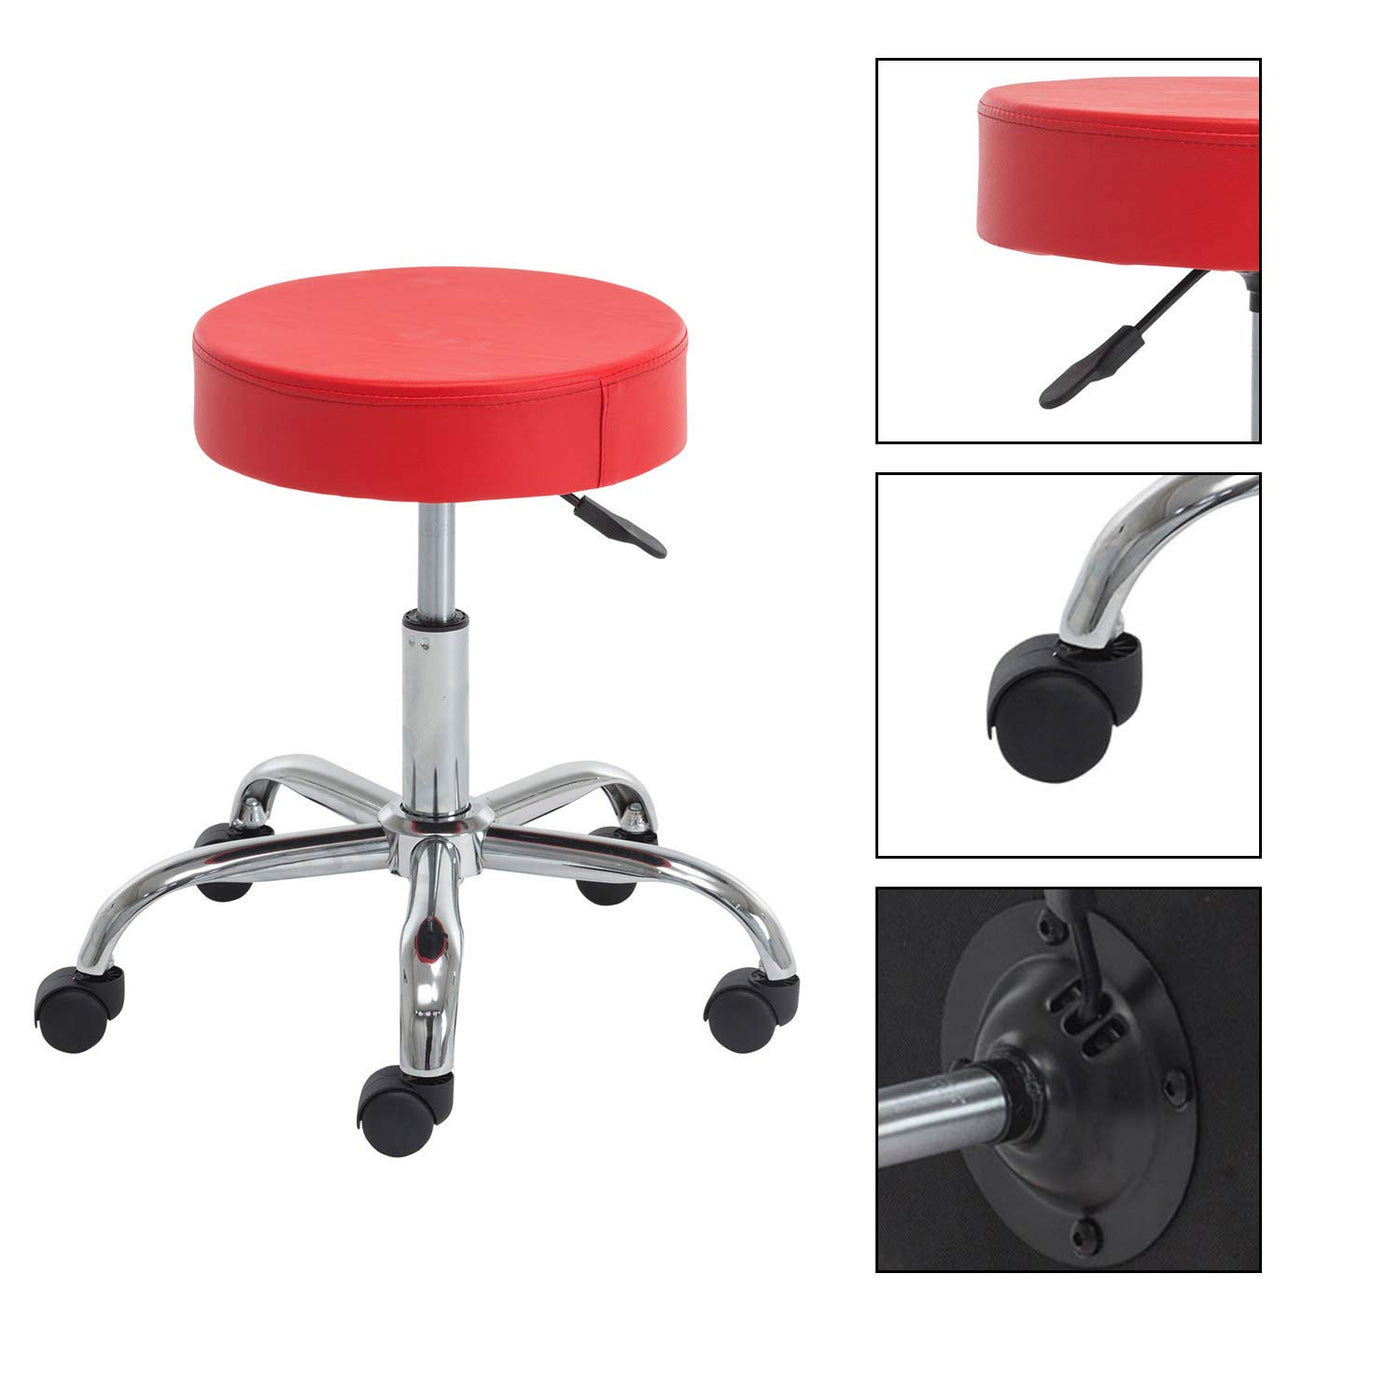 Round Seat Adjustable Rolling Stool with Wheels and Metal Plated Frame Red